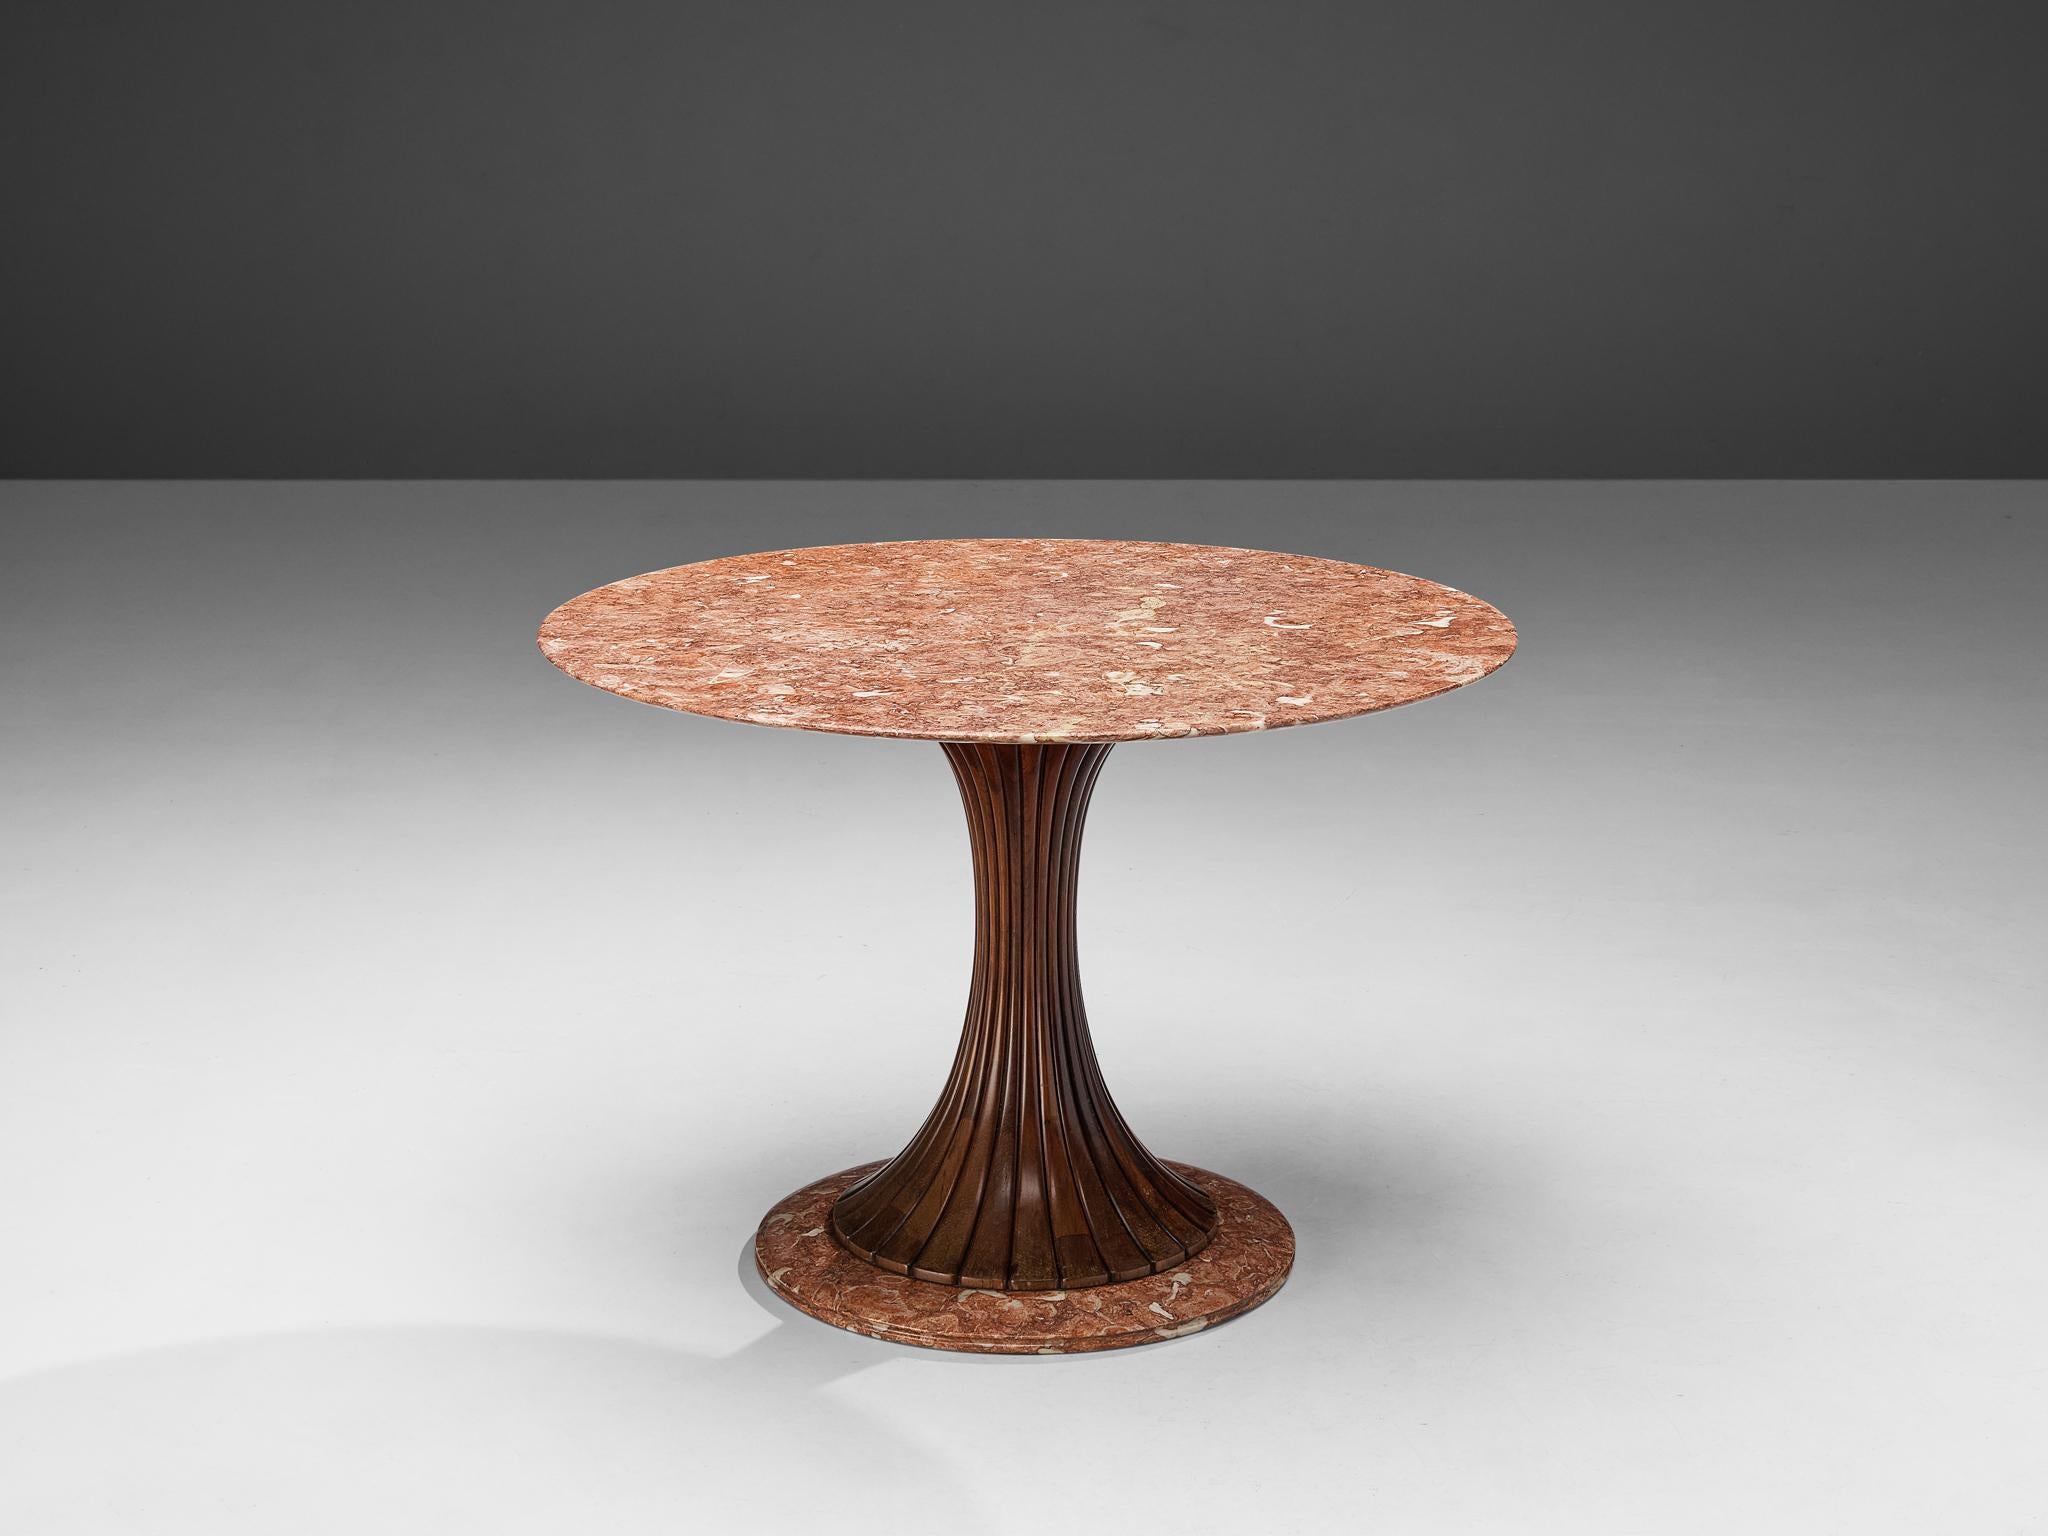 Attributed to Osvaldo Borsani, dining table, walnut, marble, Italy, 1950s

This distinctive dining or side table is attributed to Osvaldo Borsani as it bears visual similarities to Borsani’s table model ‘6542’. A round top red marble rests on an